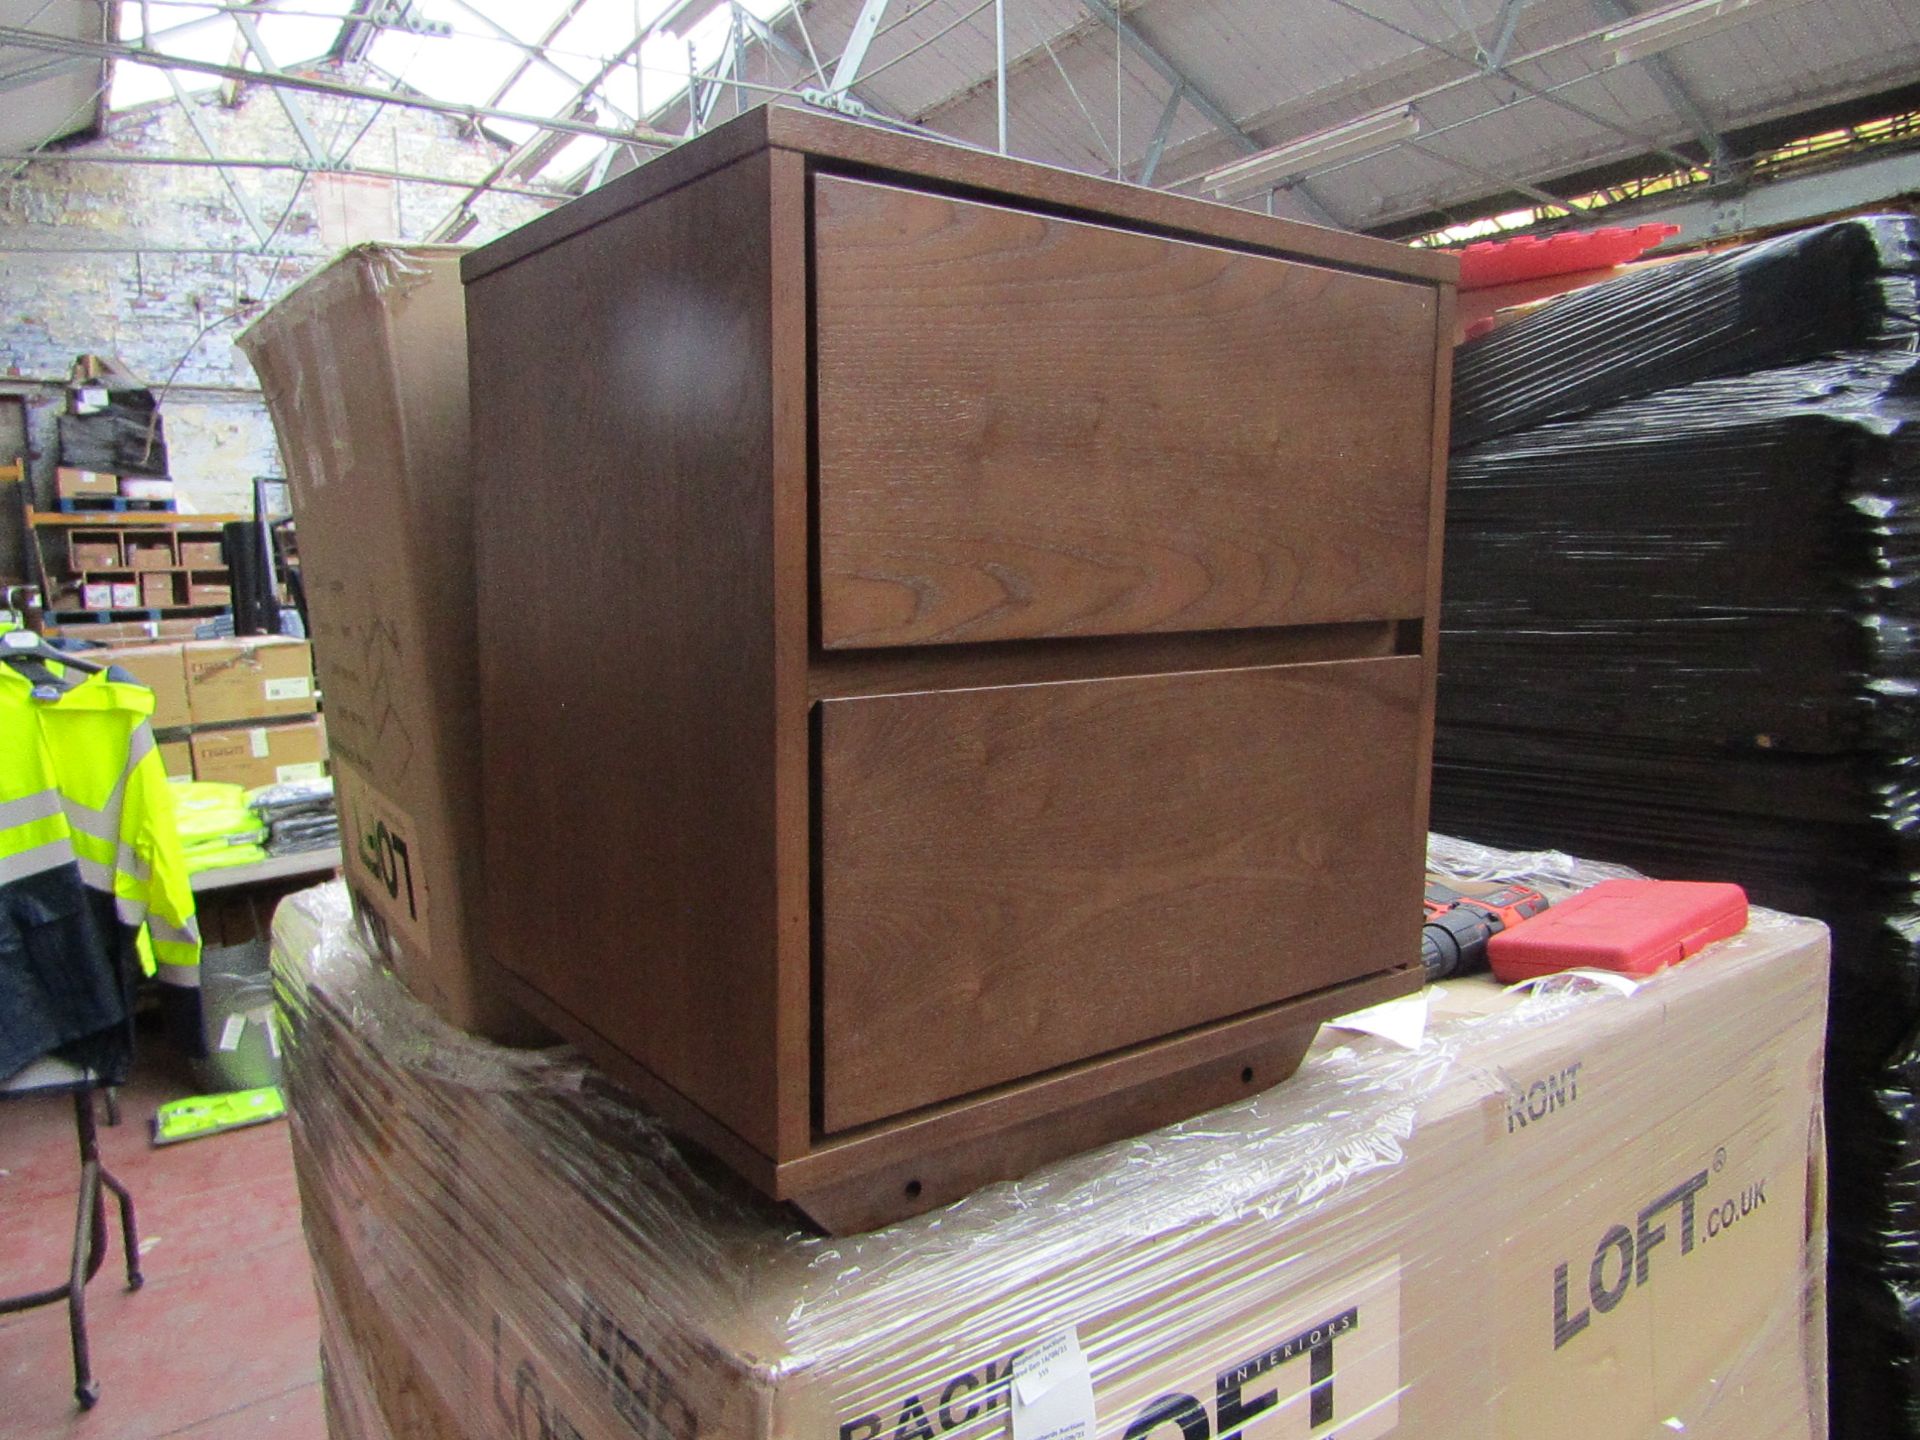 1x LOFT INTERIORS Moller Premium 2 Drawer Bedside Unit in Ash TOTAL RRP £120 This lot is a